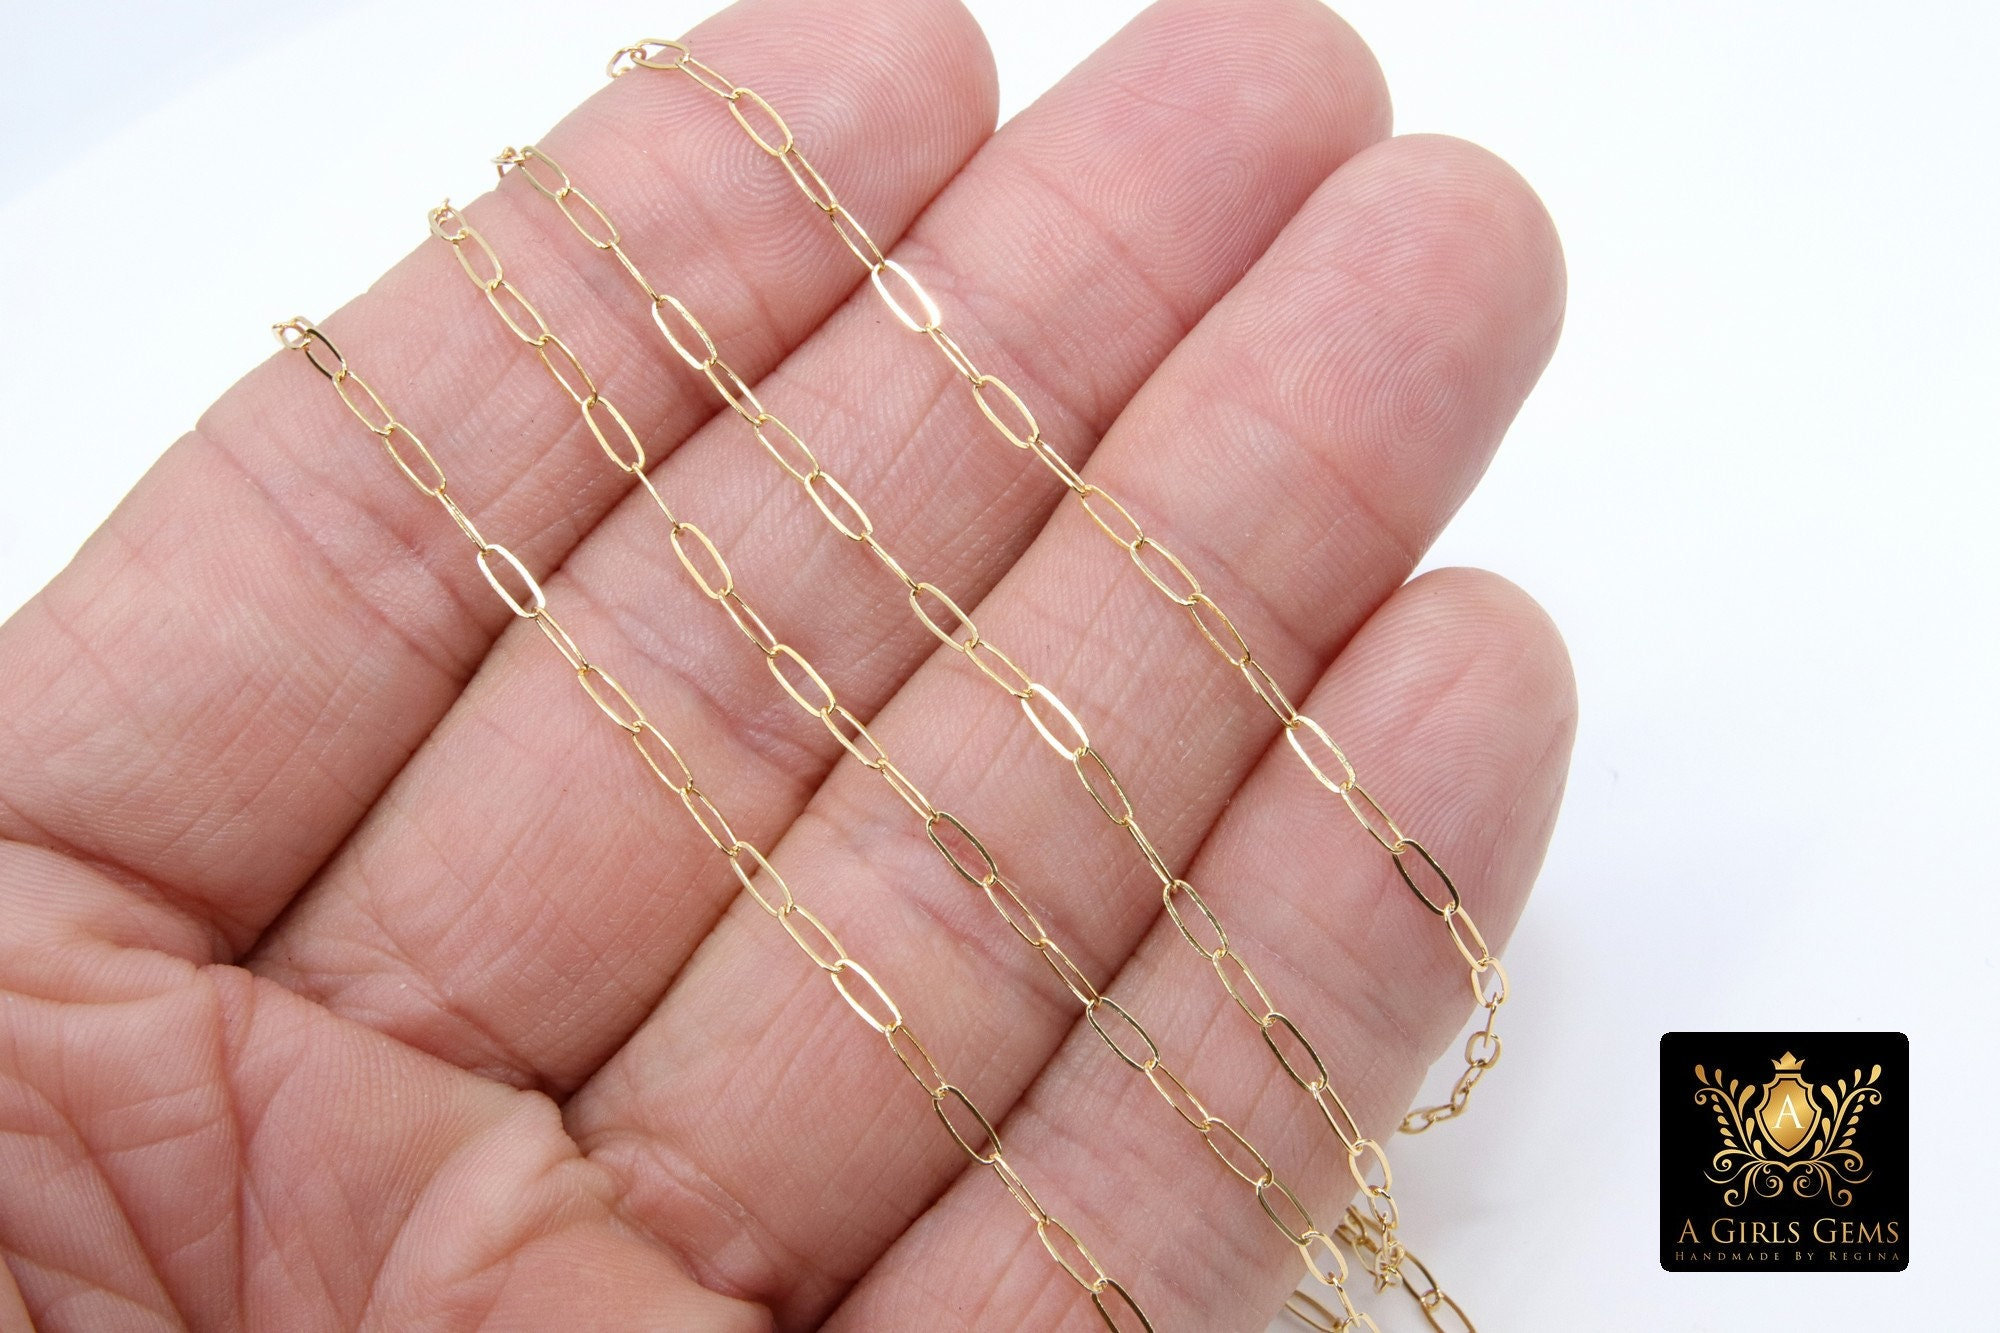 Wholesale Drawn Cable Necklace Chain, 14k Gold Filled Chain, 1.3-4